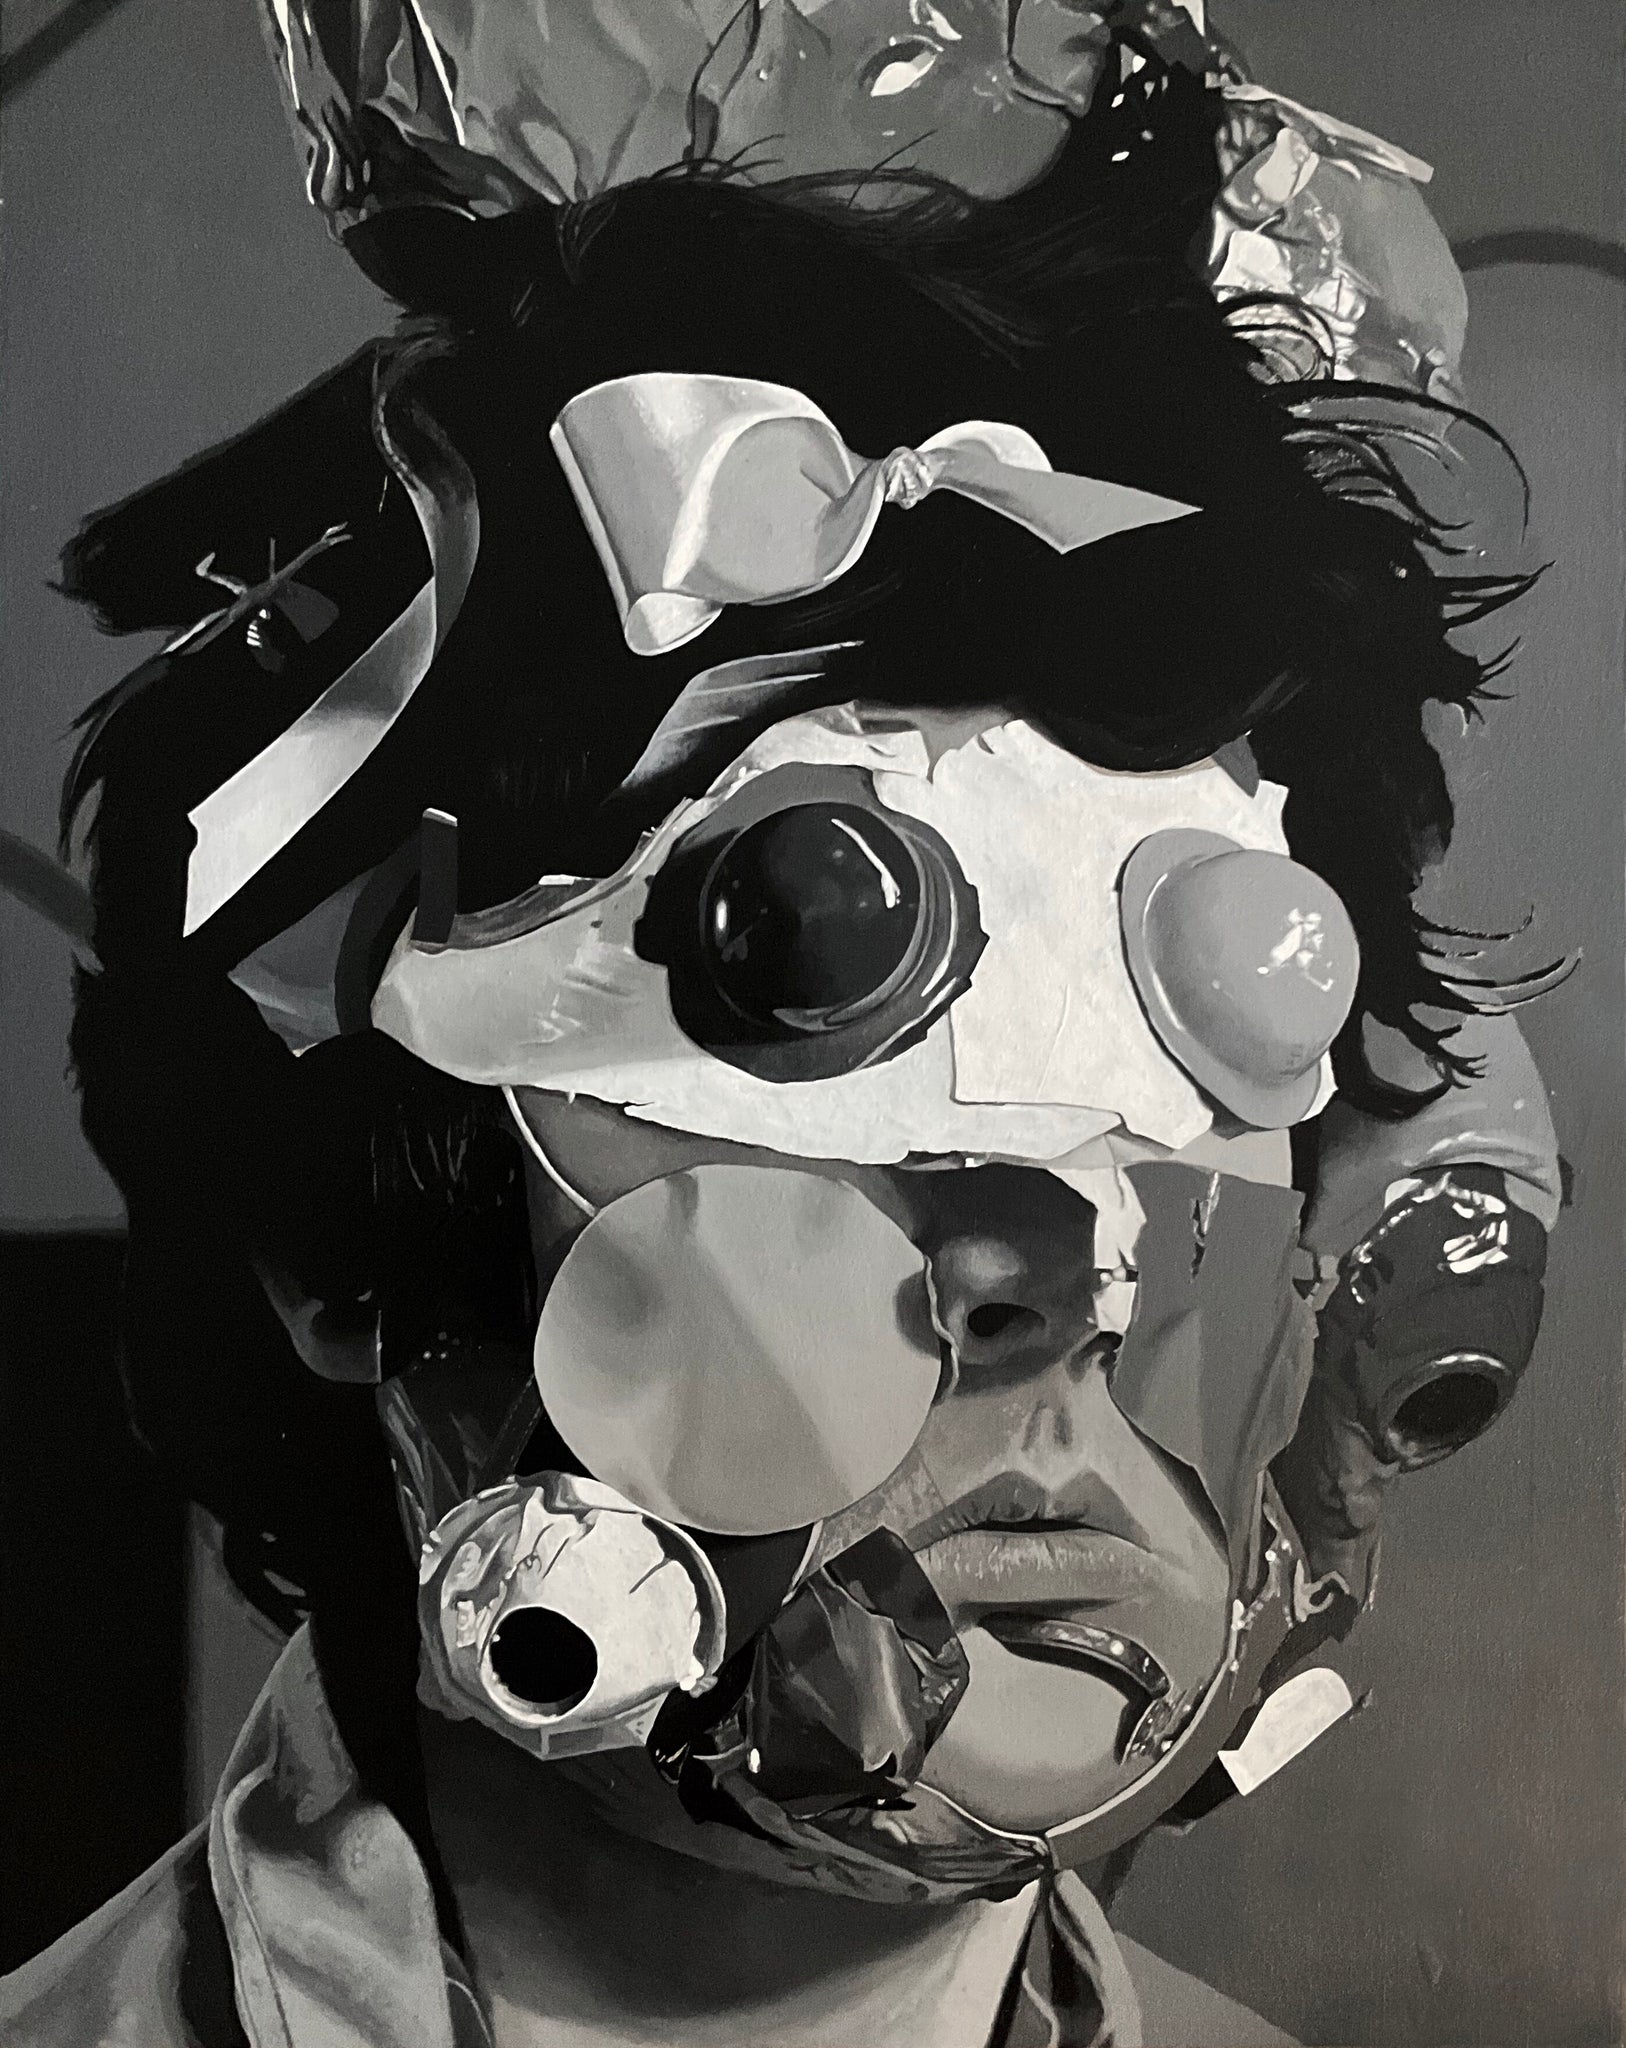 Dane Patterson, "A portrait of a man with paper scraps, plastic fragments, ribbons, duct tape, string, metal bits, and fabric bundles."